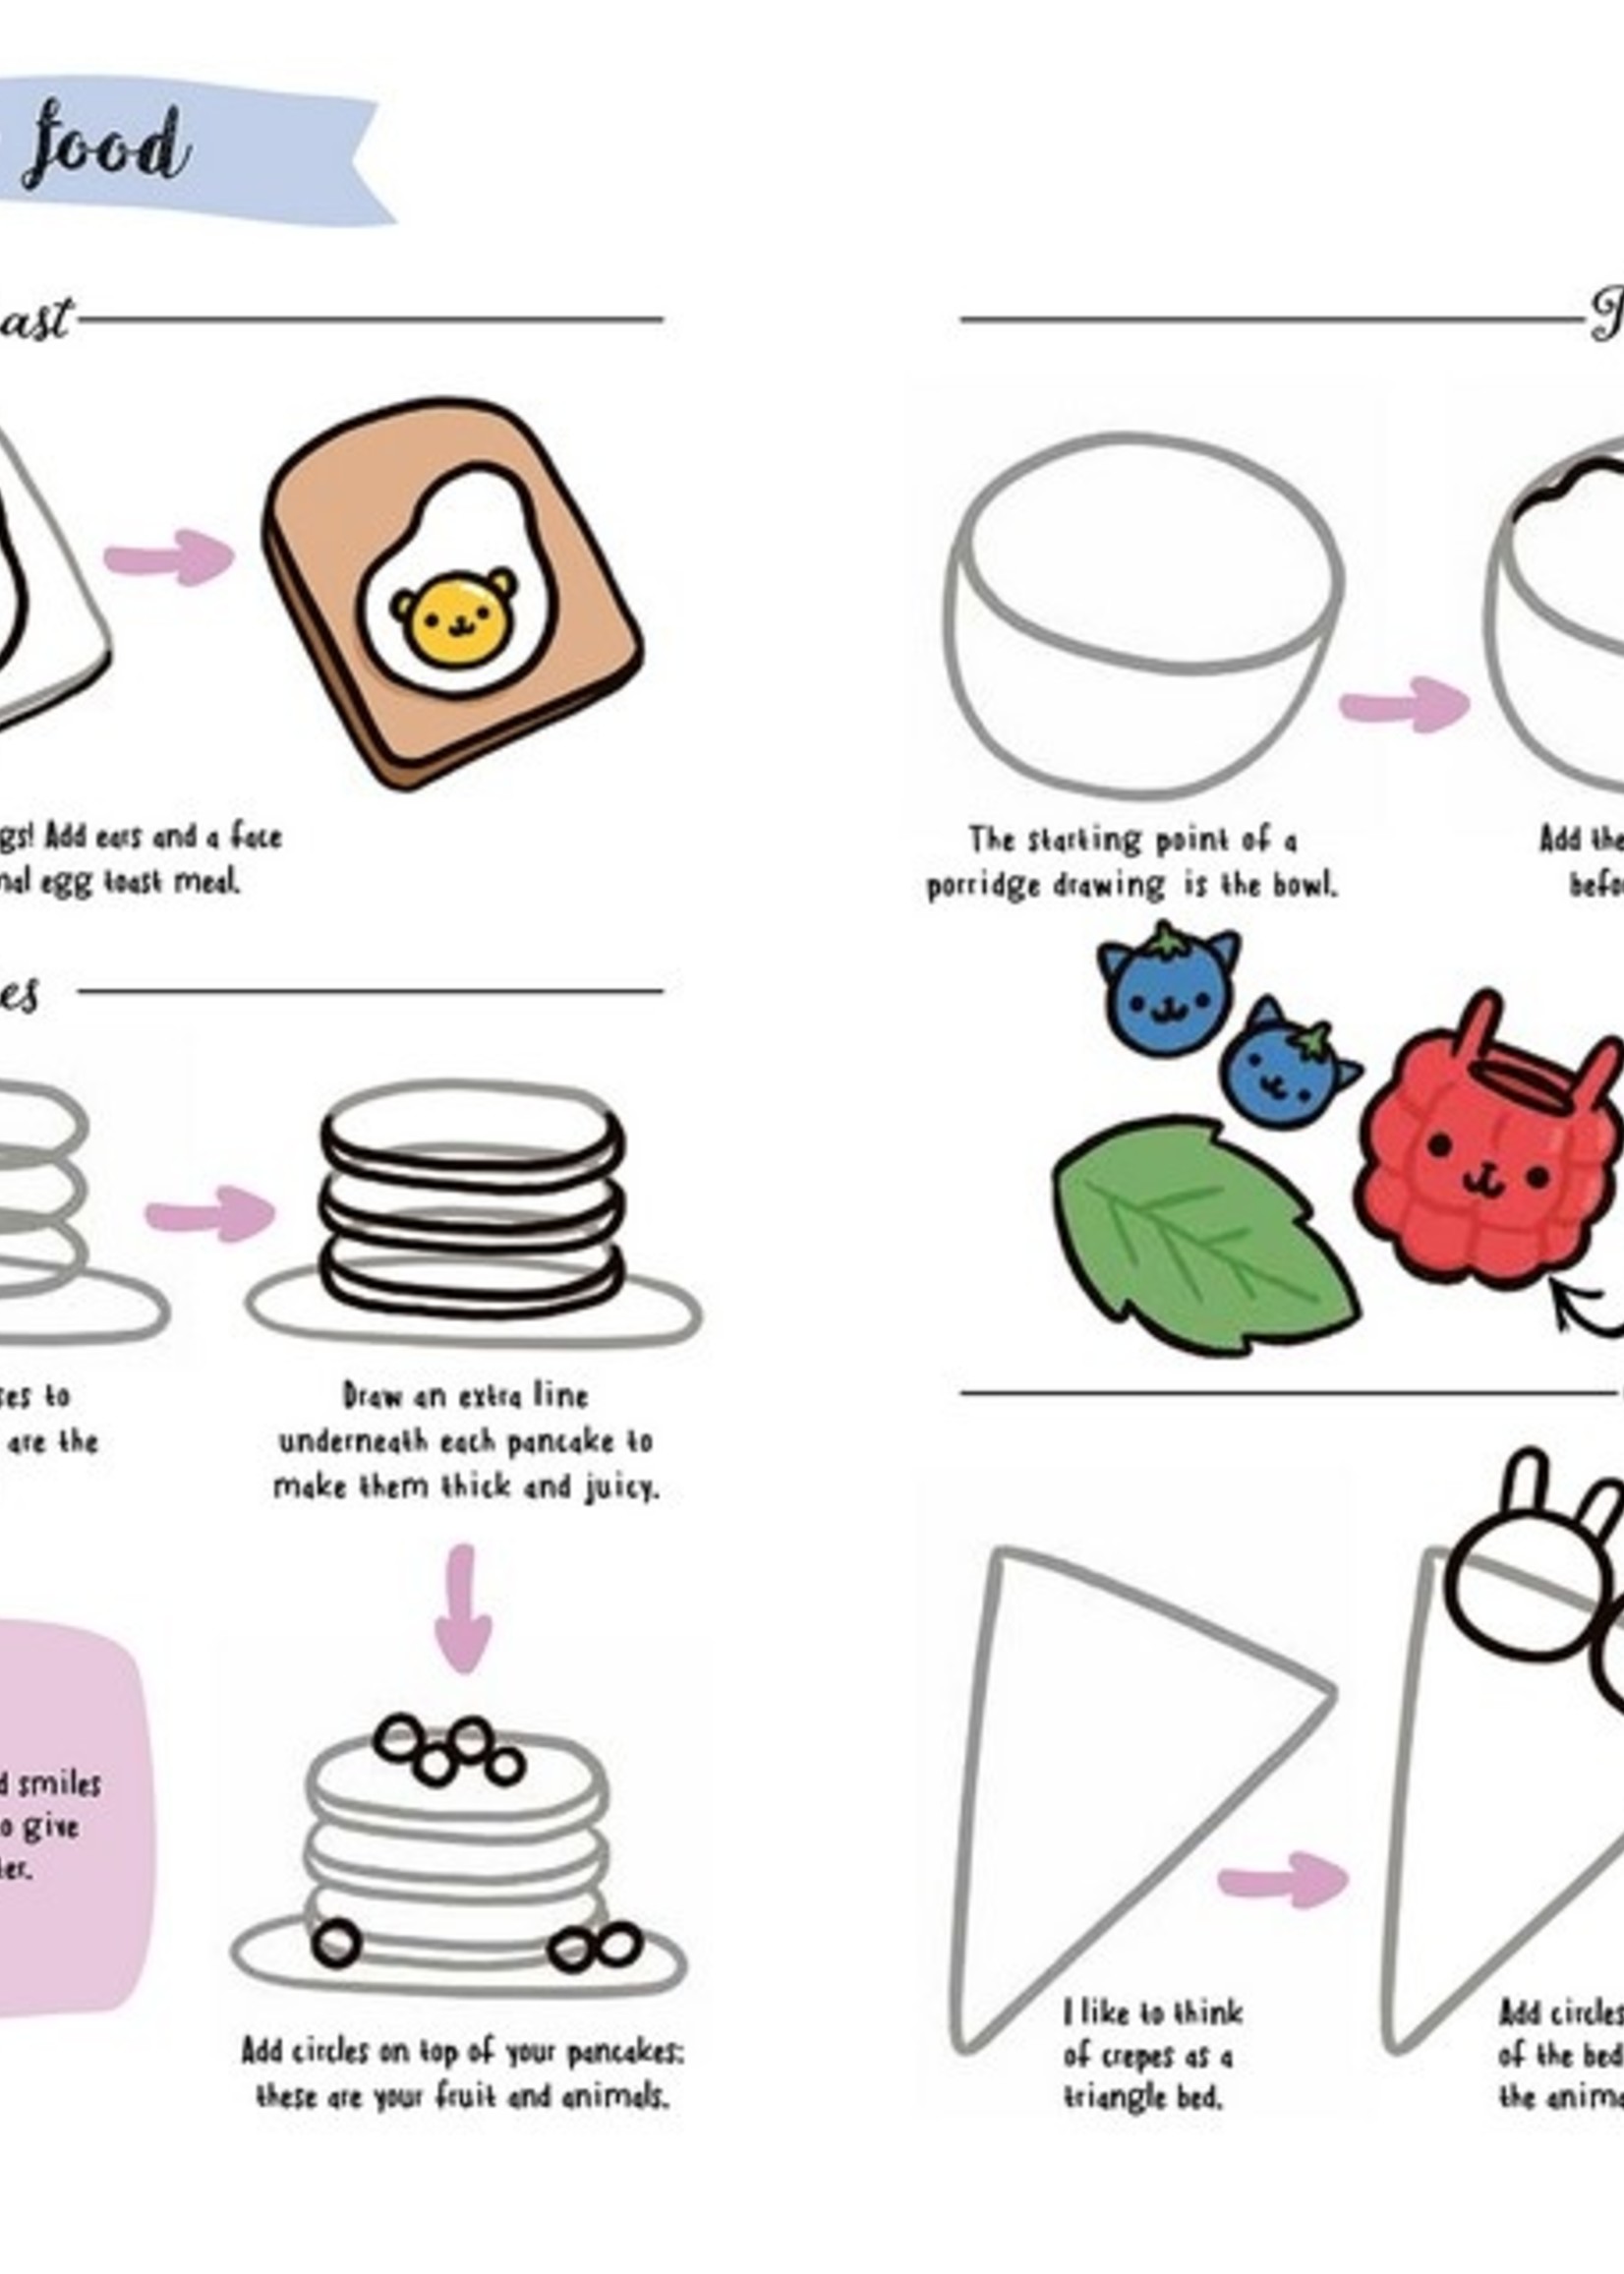 😍99+ CUTE KAWAII FOOD DRAWINGS TO BRIGHTEN YOUR DAY To download free a lot  click here😀 https://bit.ly/3LwunL5 Get ready to smile wi... | Instagram